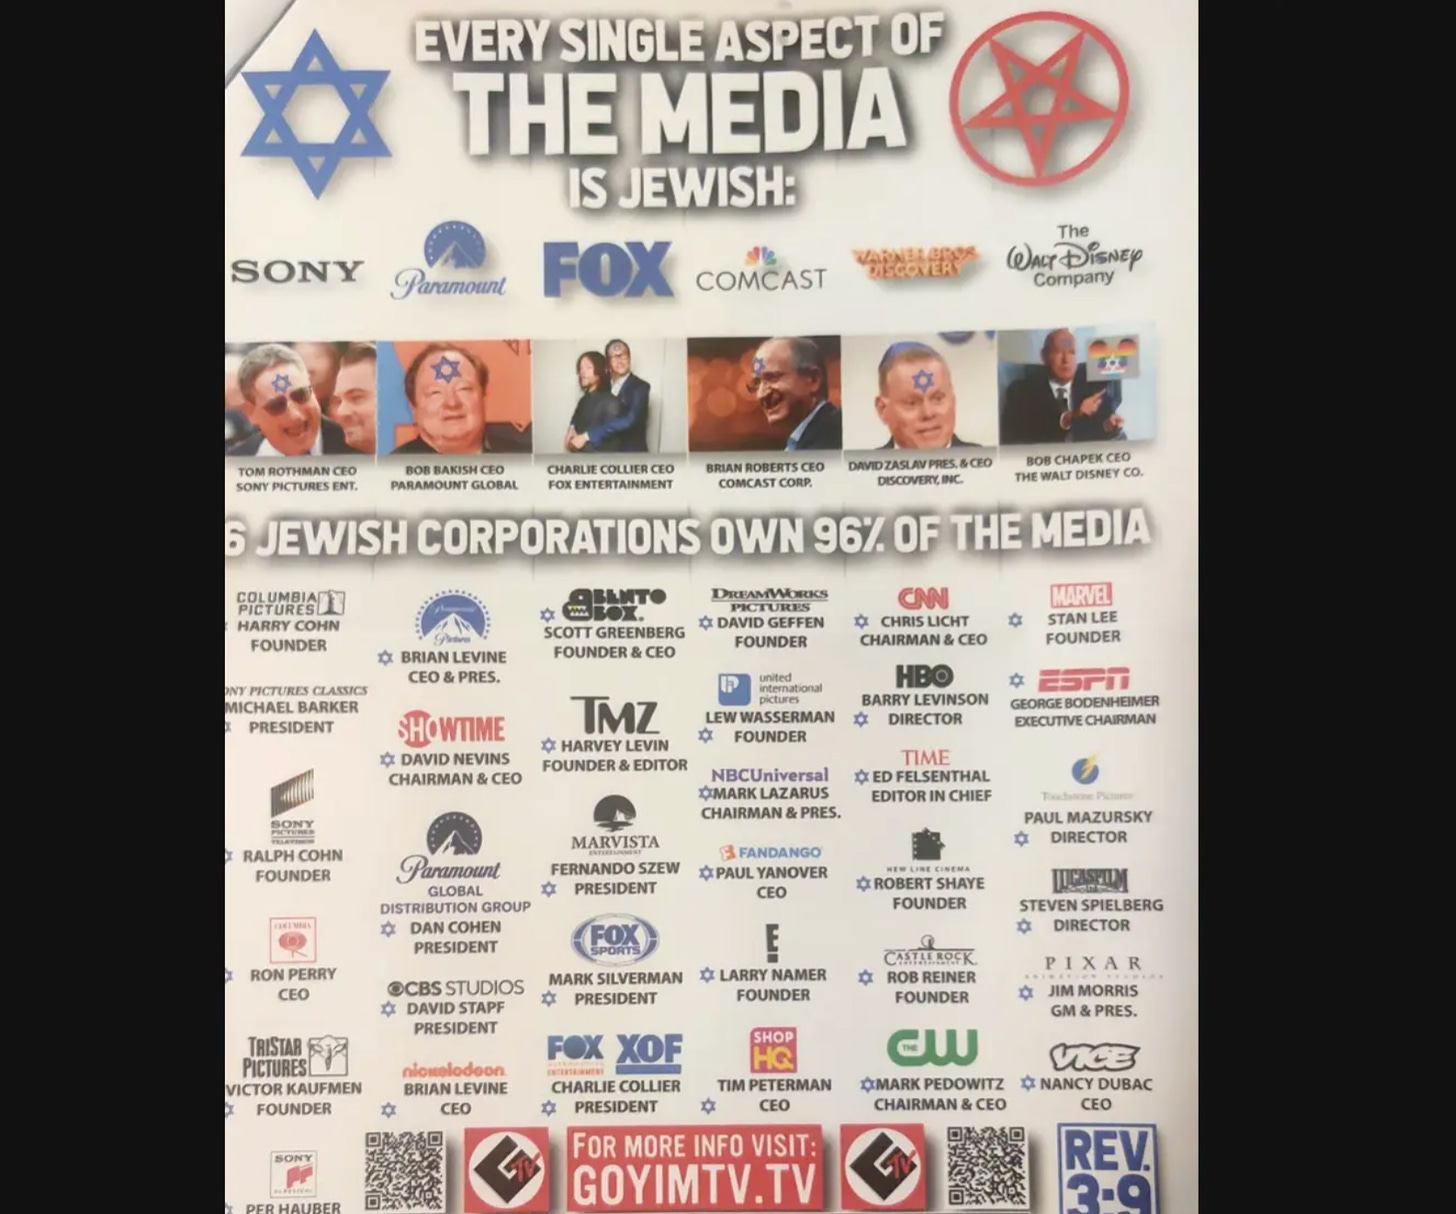 Image of a flyers that has been found in several states purportedly showing Jewish media ownership